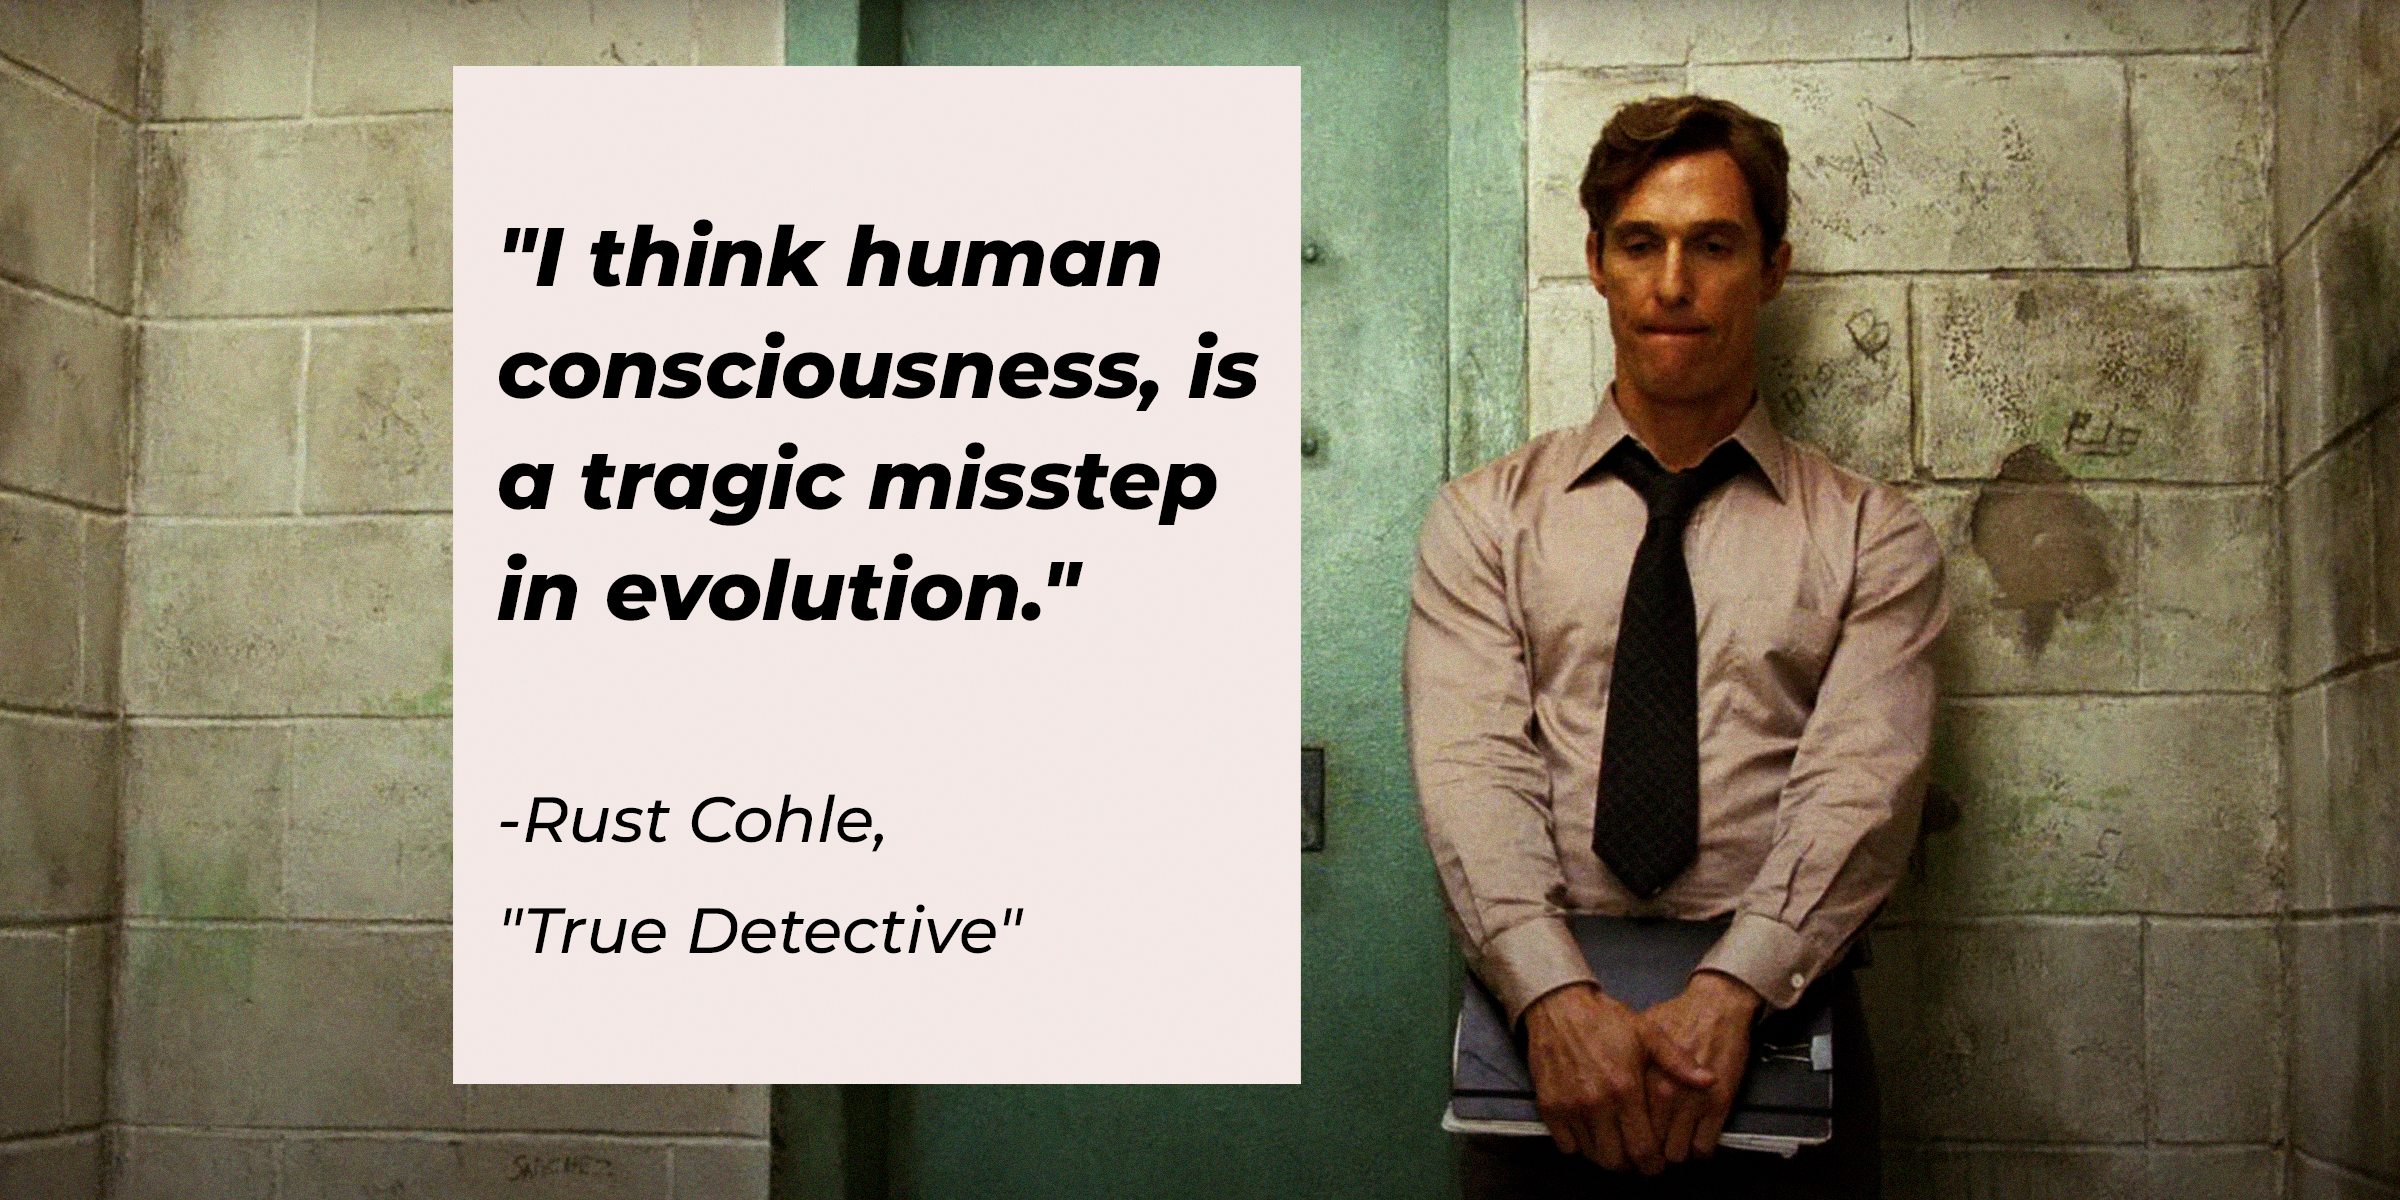 An image of Rust Cohle in "True Detective" with his quote: "I think human consciousness, is a tragic misstep in evolution." | Source: facebook.com/TrueDetective